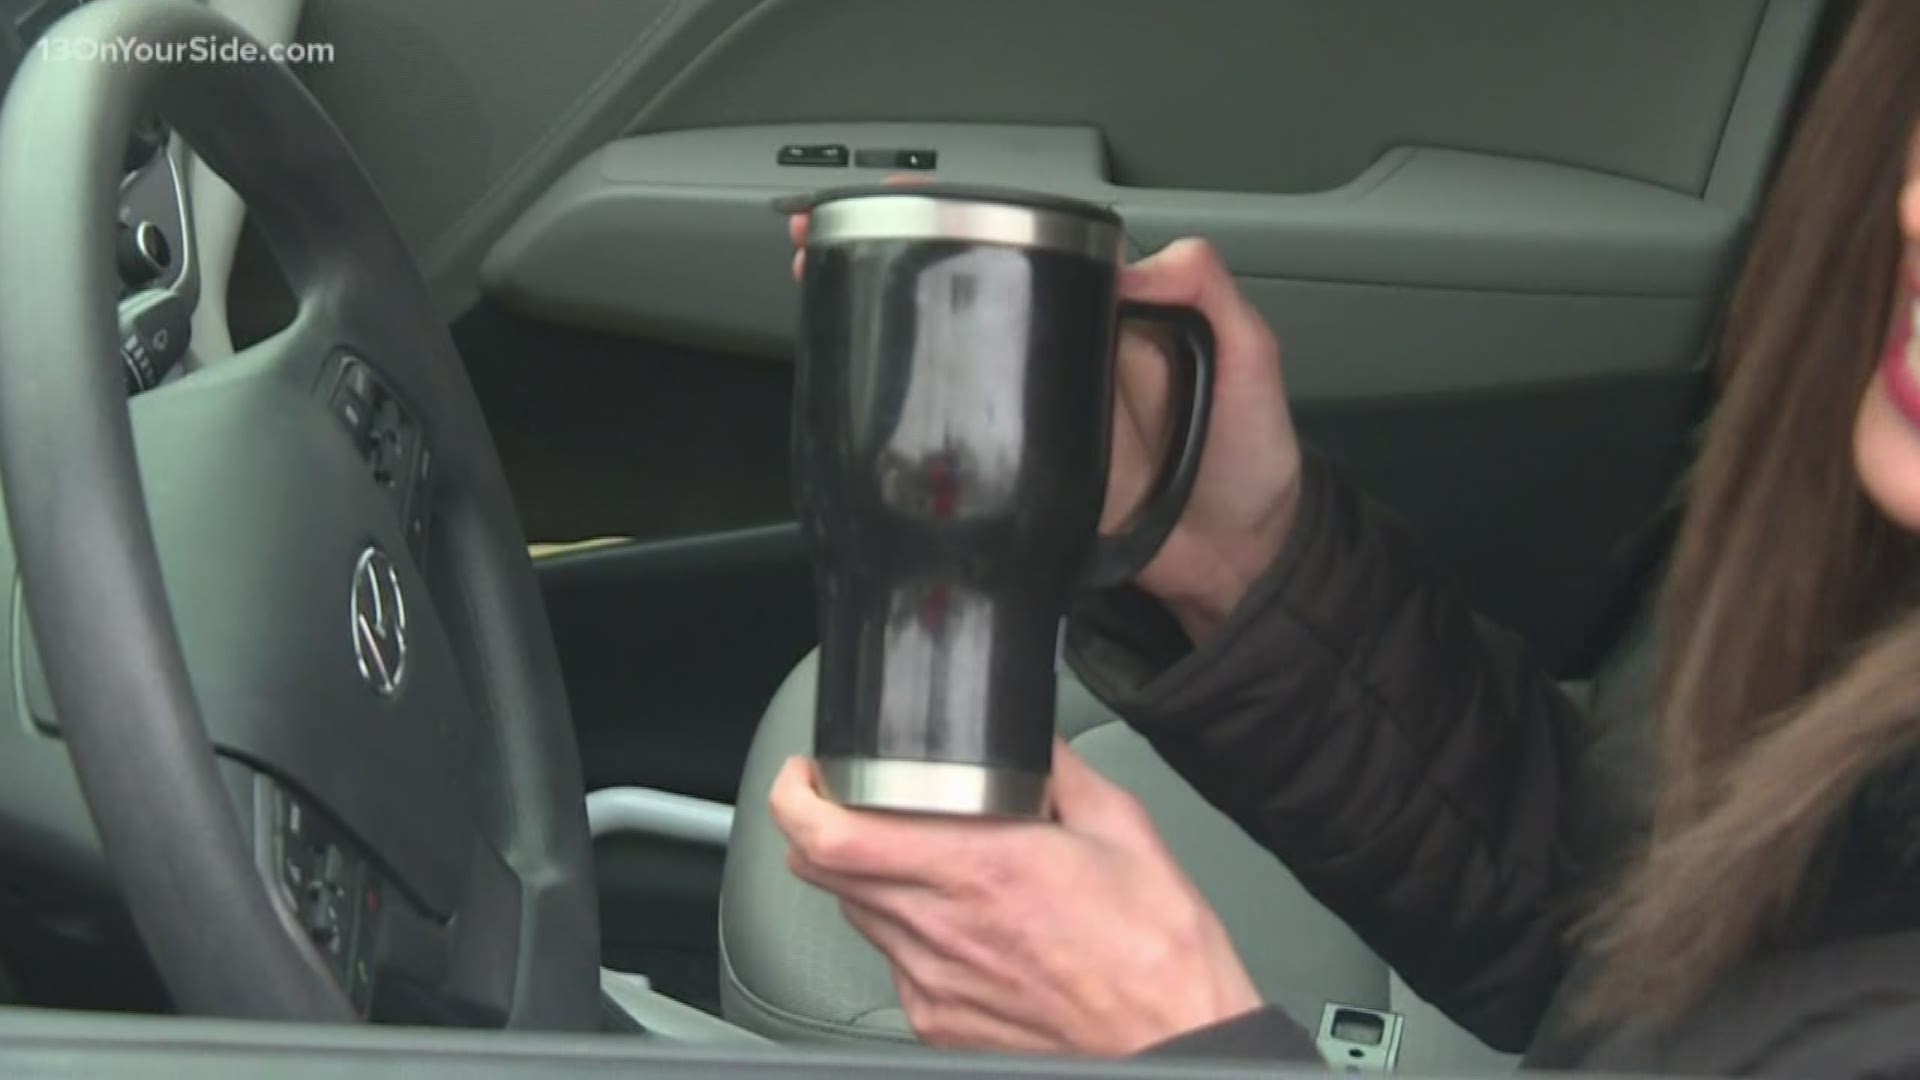 Heading on a road trip this holiday season? Kristin Mazur puts a travel mug to the test, to see if it can keep your coffee hot for hours.